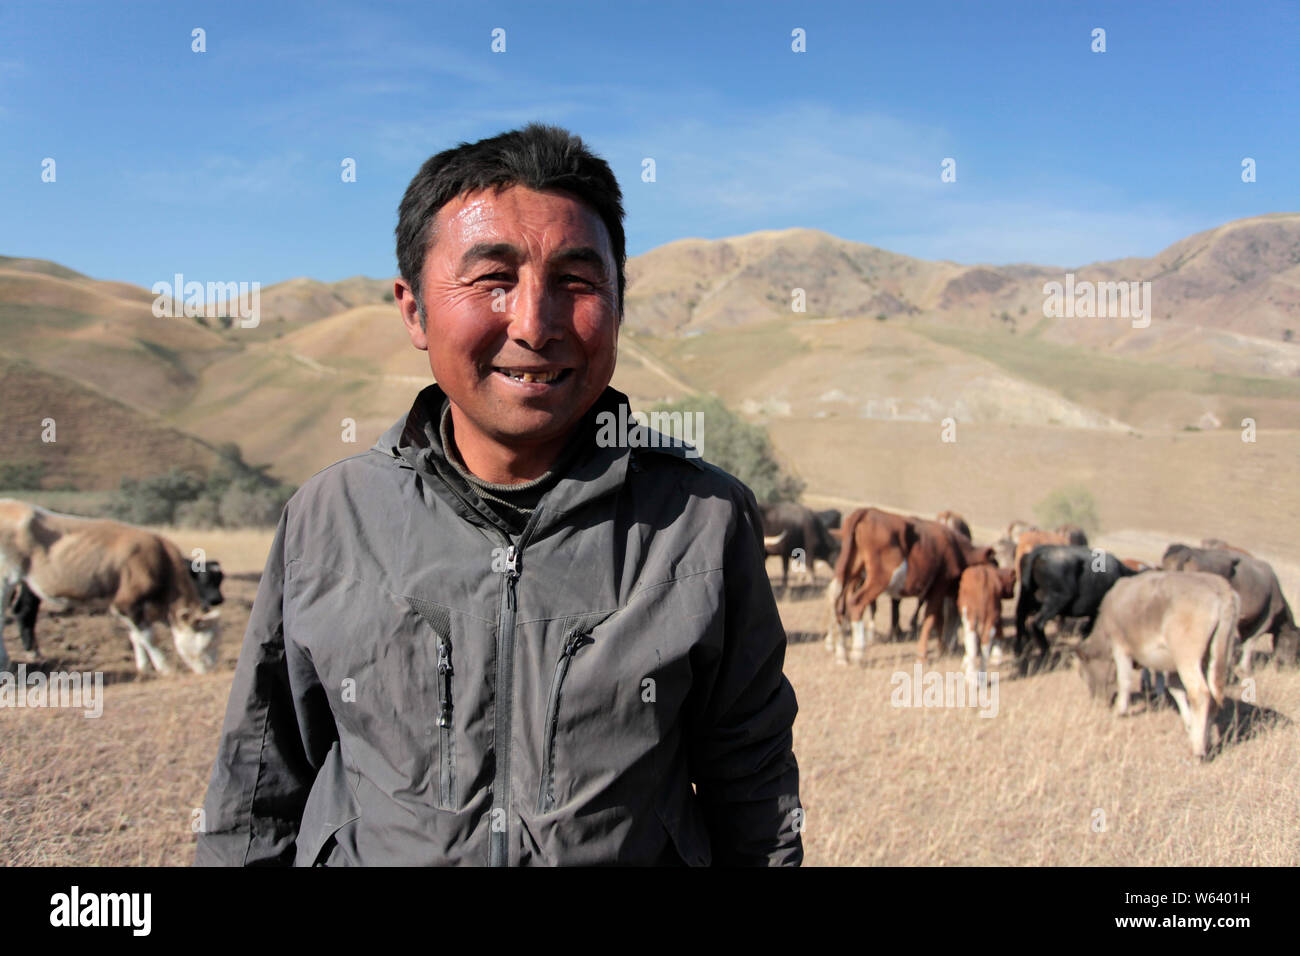 A Kazakh nomad moves his sheep and cattle to an autumn pasture during a seasonal livestock migration in Yining city, Ili Kazakh Autonomous Prefecture, Stock Photo